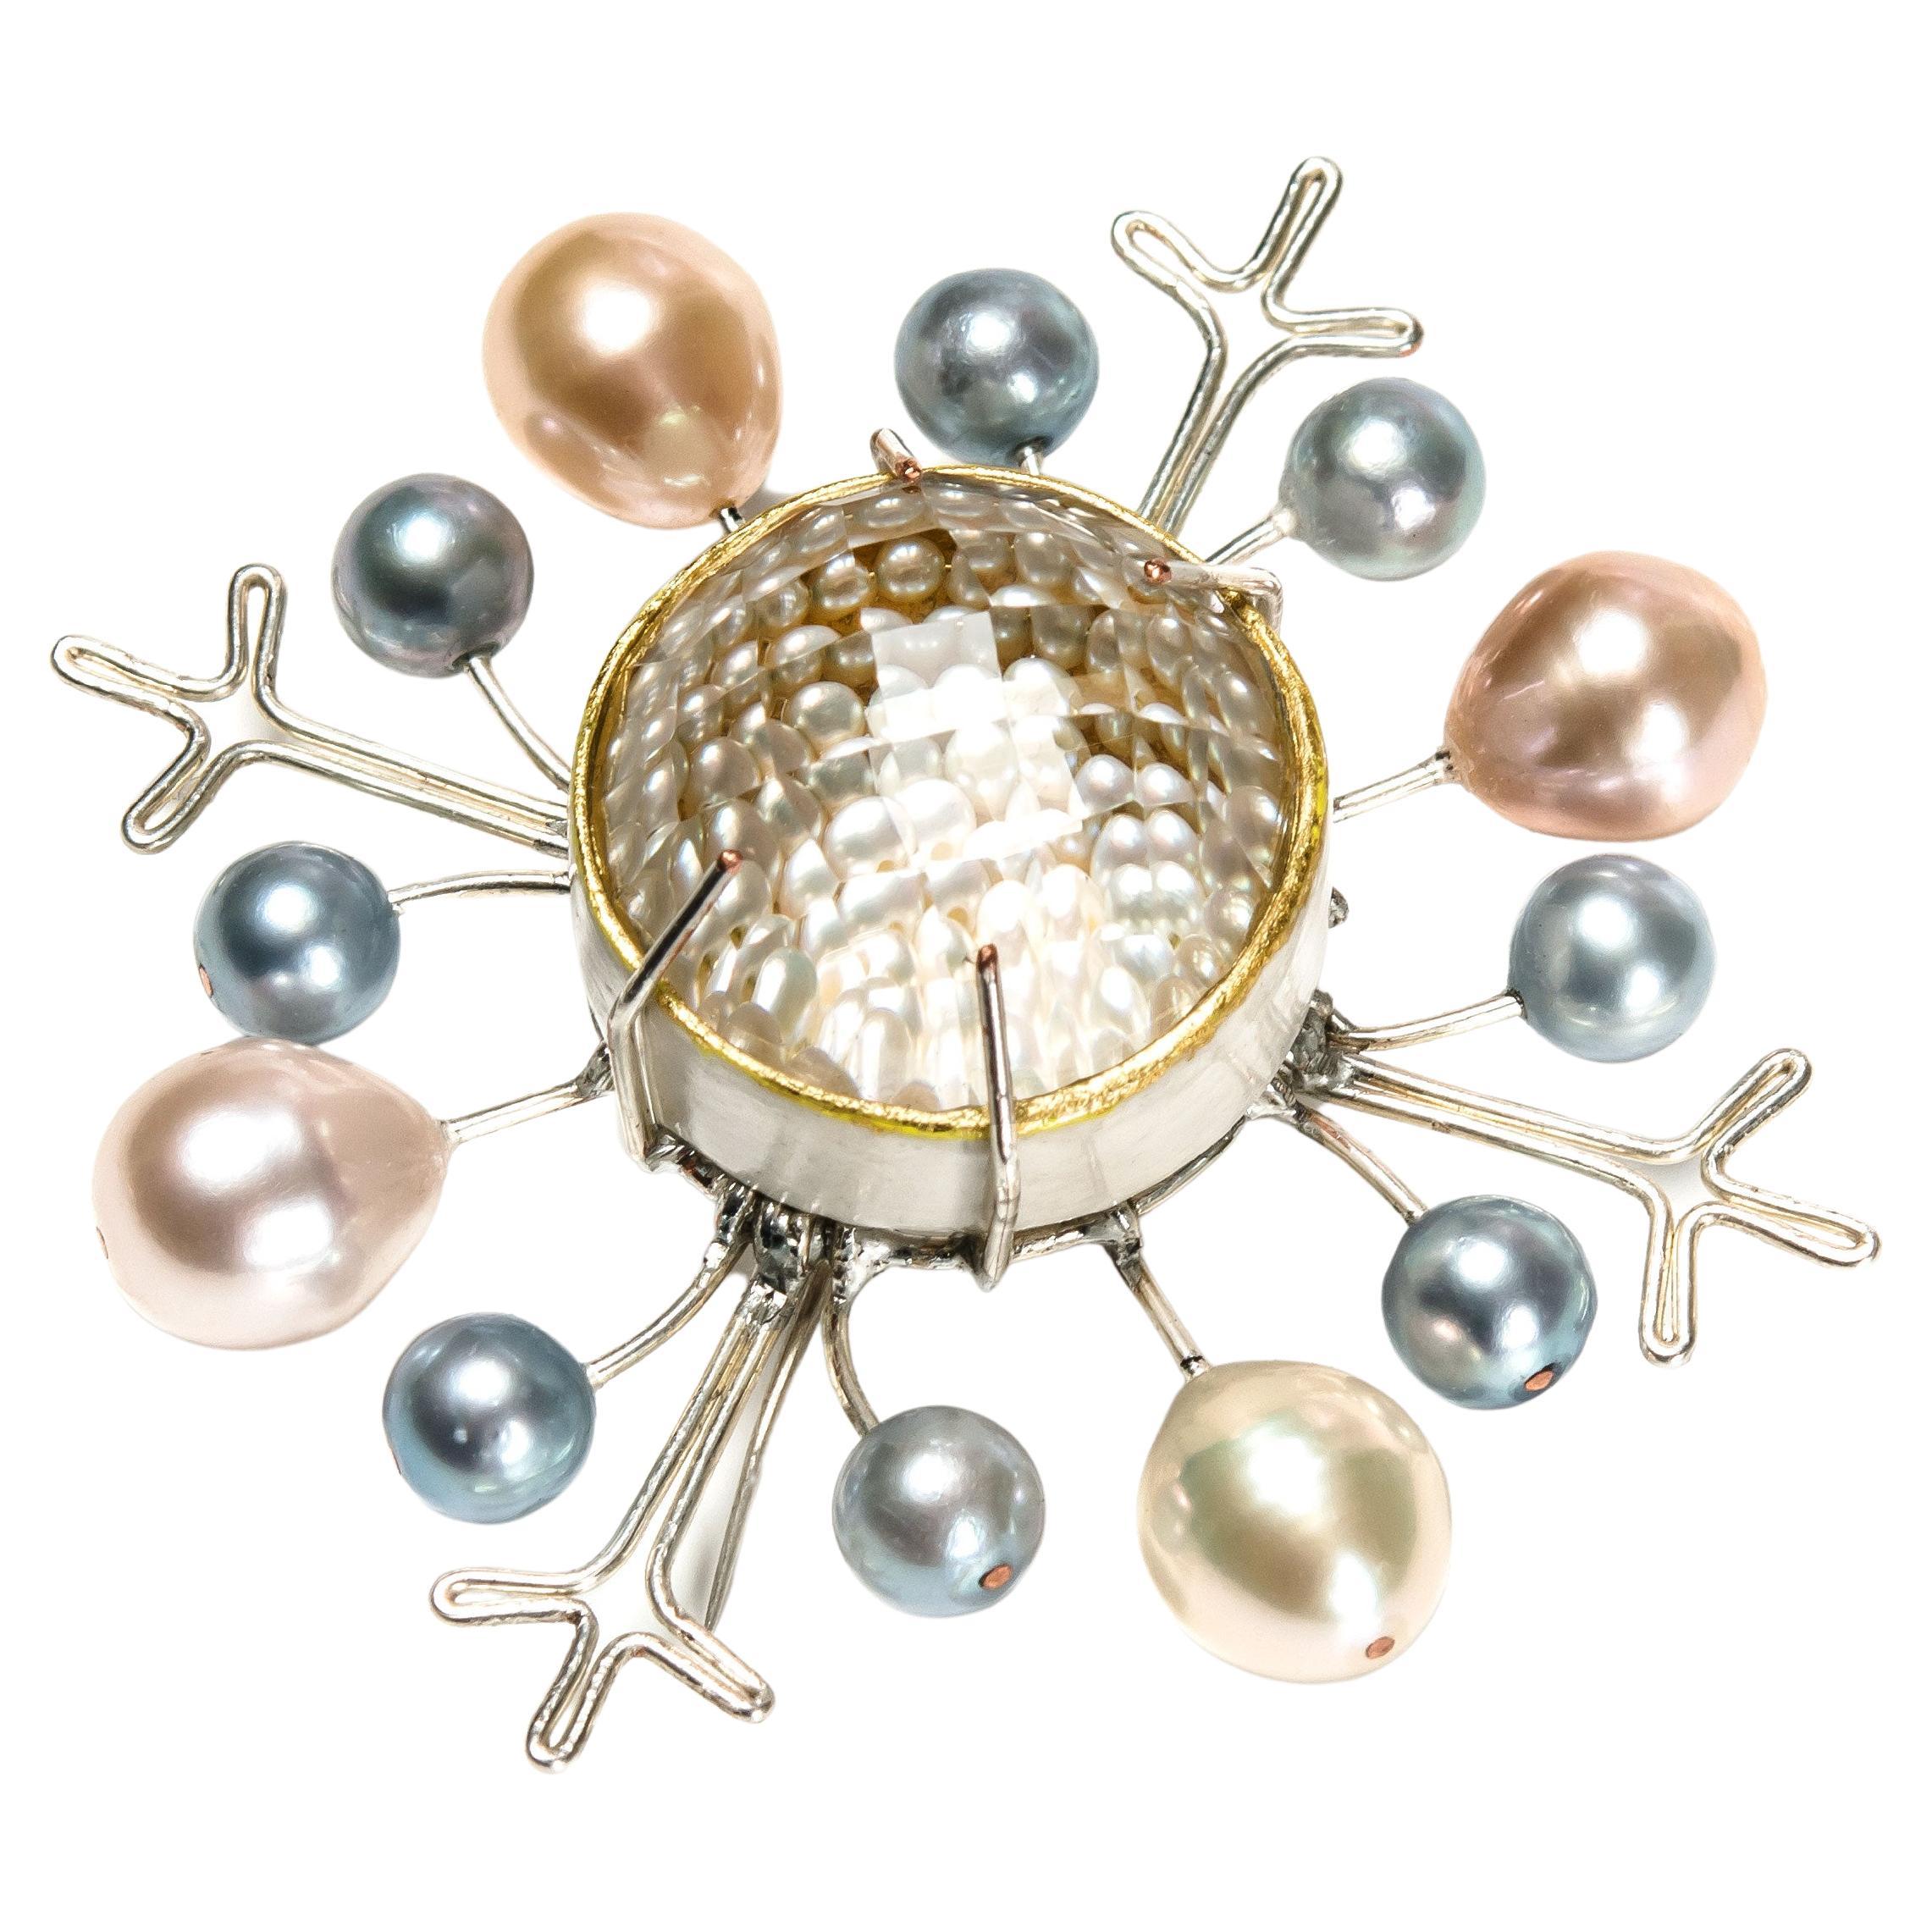 Bodyfurnitures Brooch: Transparency View with Rock Crystal with Pearls, Silver For Sale